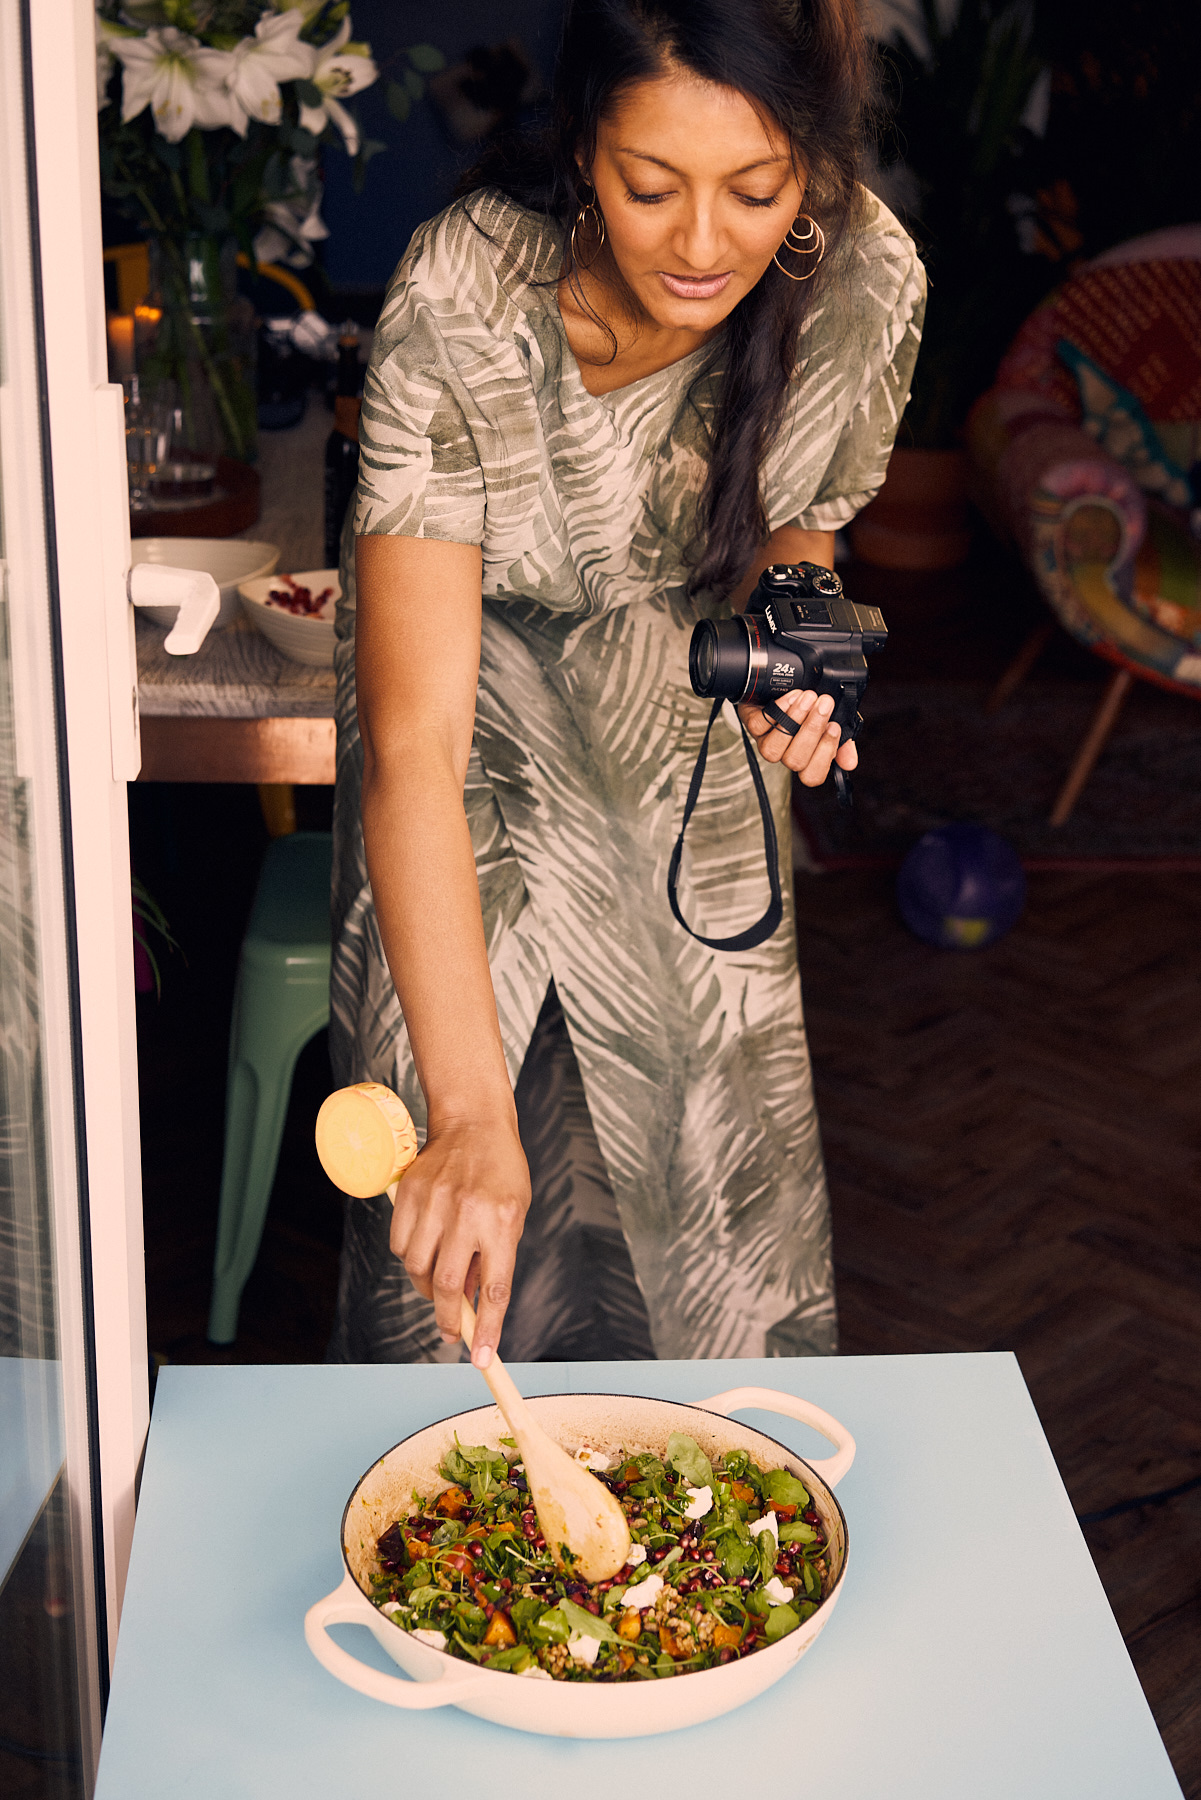 Rukmini Iyer leans over a plate while holding a camera